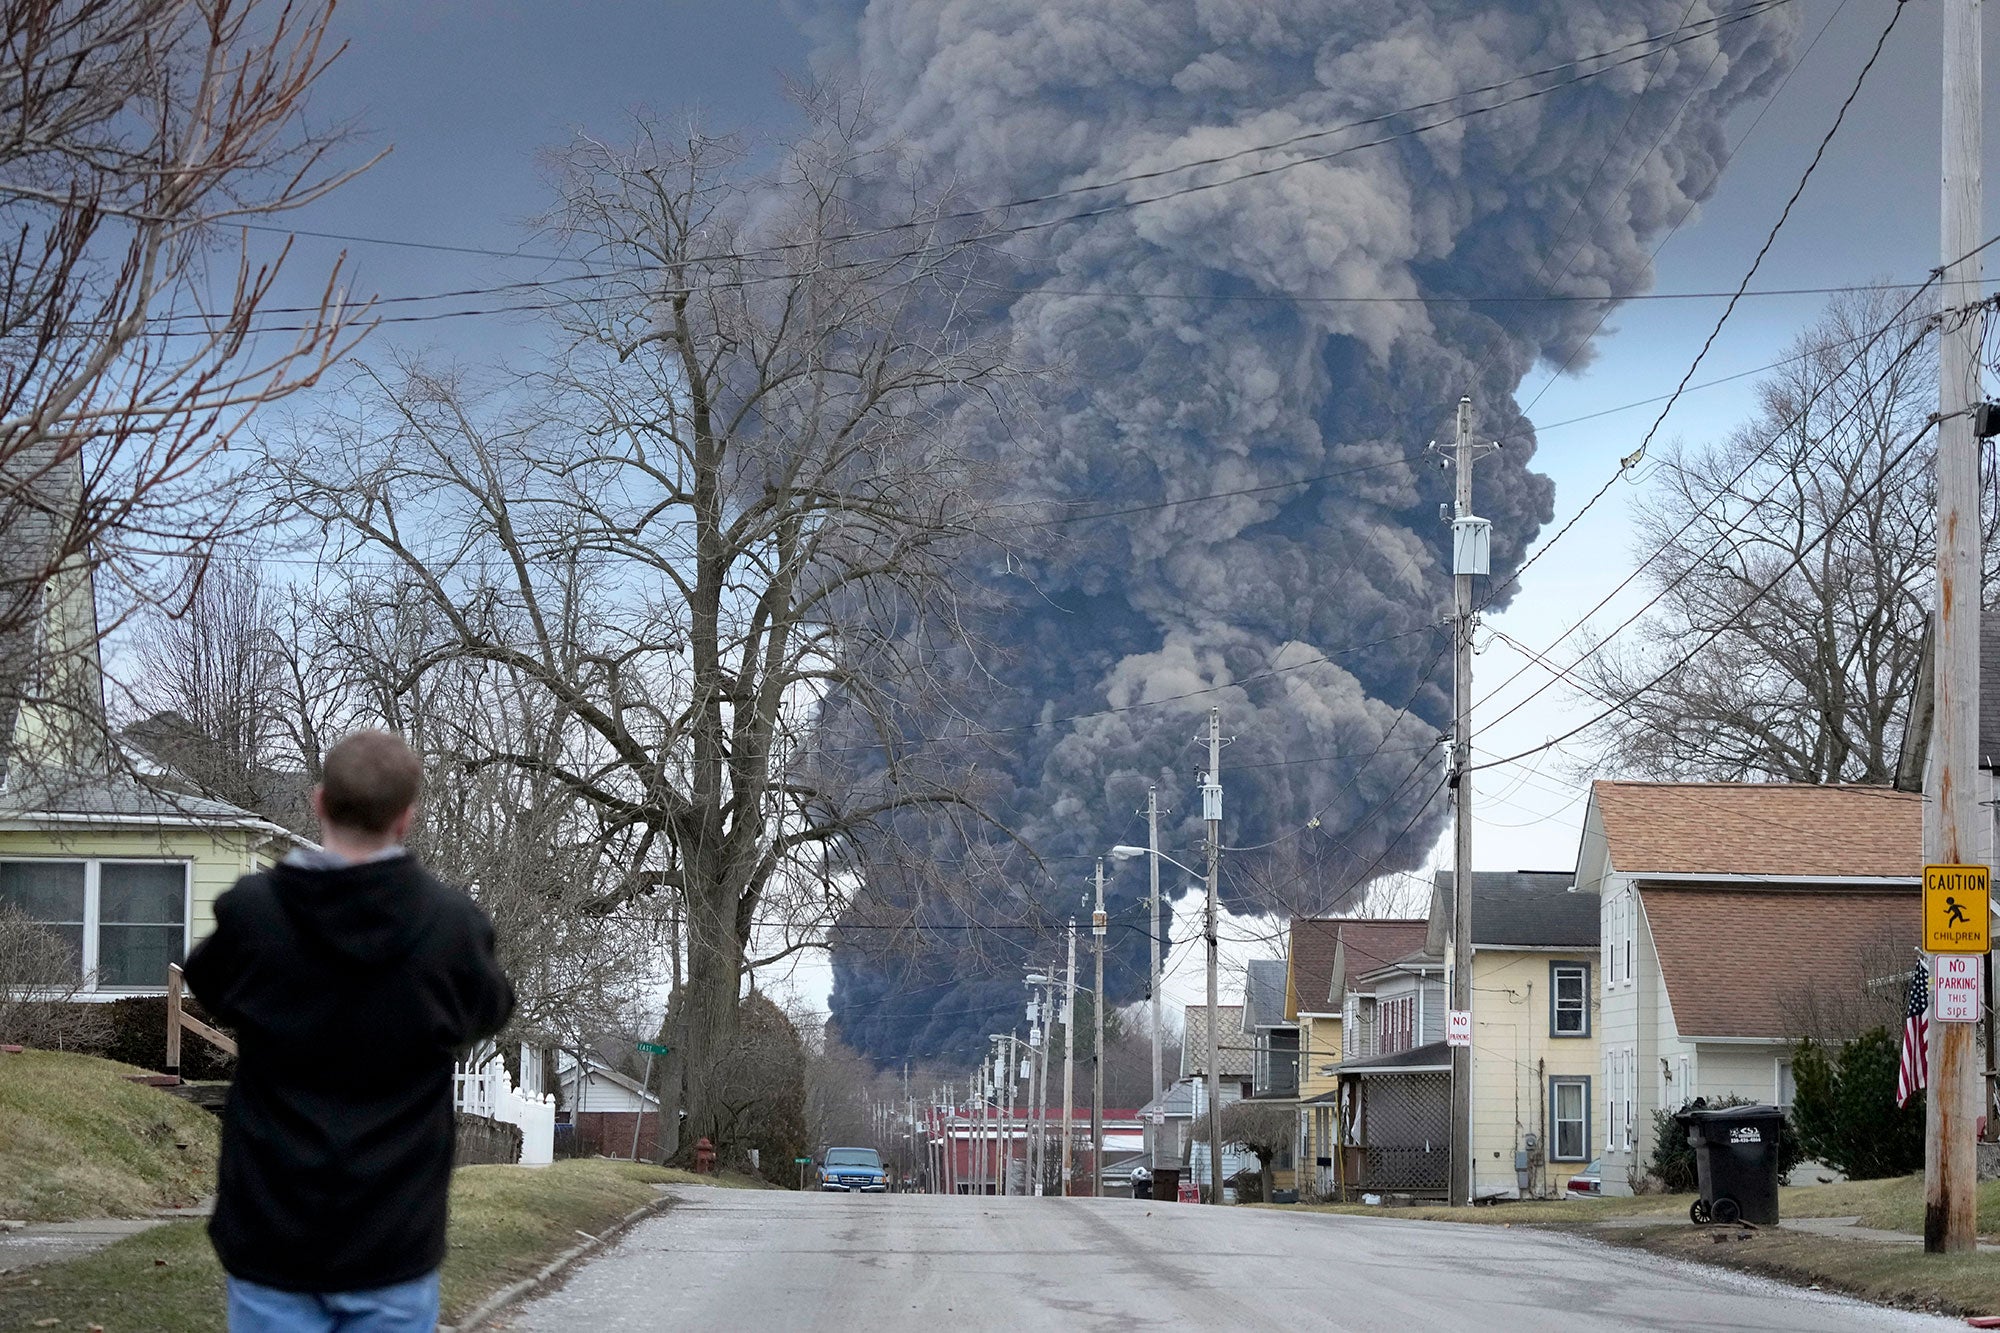 A man takes photos as a black plume rises over East Palestine, Ohio, as a result of a controlled detonation of a portion of the derailed Norfolk Southern train, Feb. 6, 2023. After toxic chemicals were released into the air from a wrecked train in Ohio, evacuated residents remain in the dark about what toxic substances are lingering in their vacated neighborhoods while they await approval to return home.